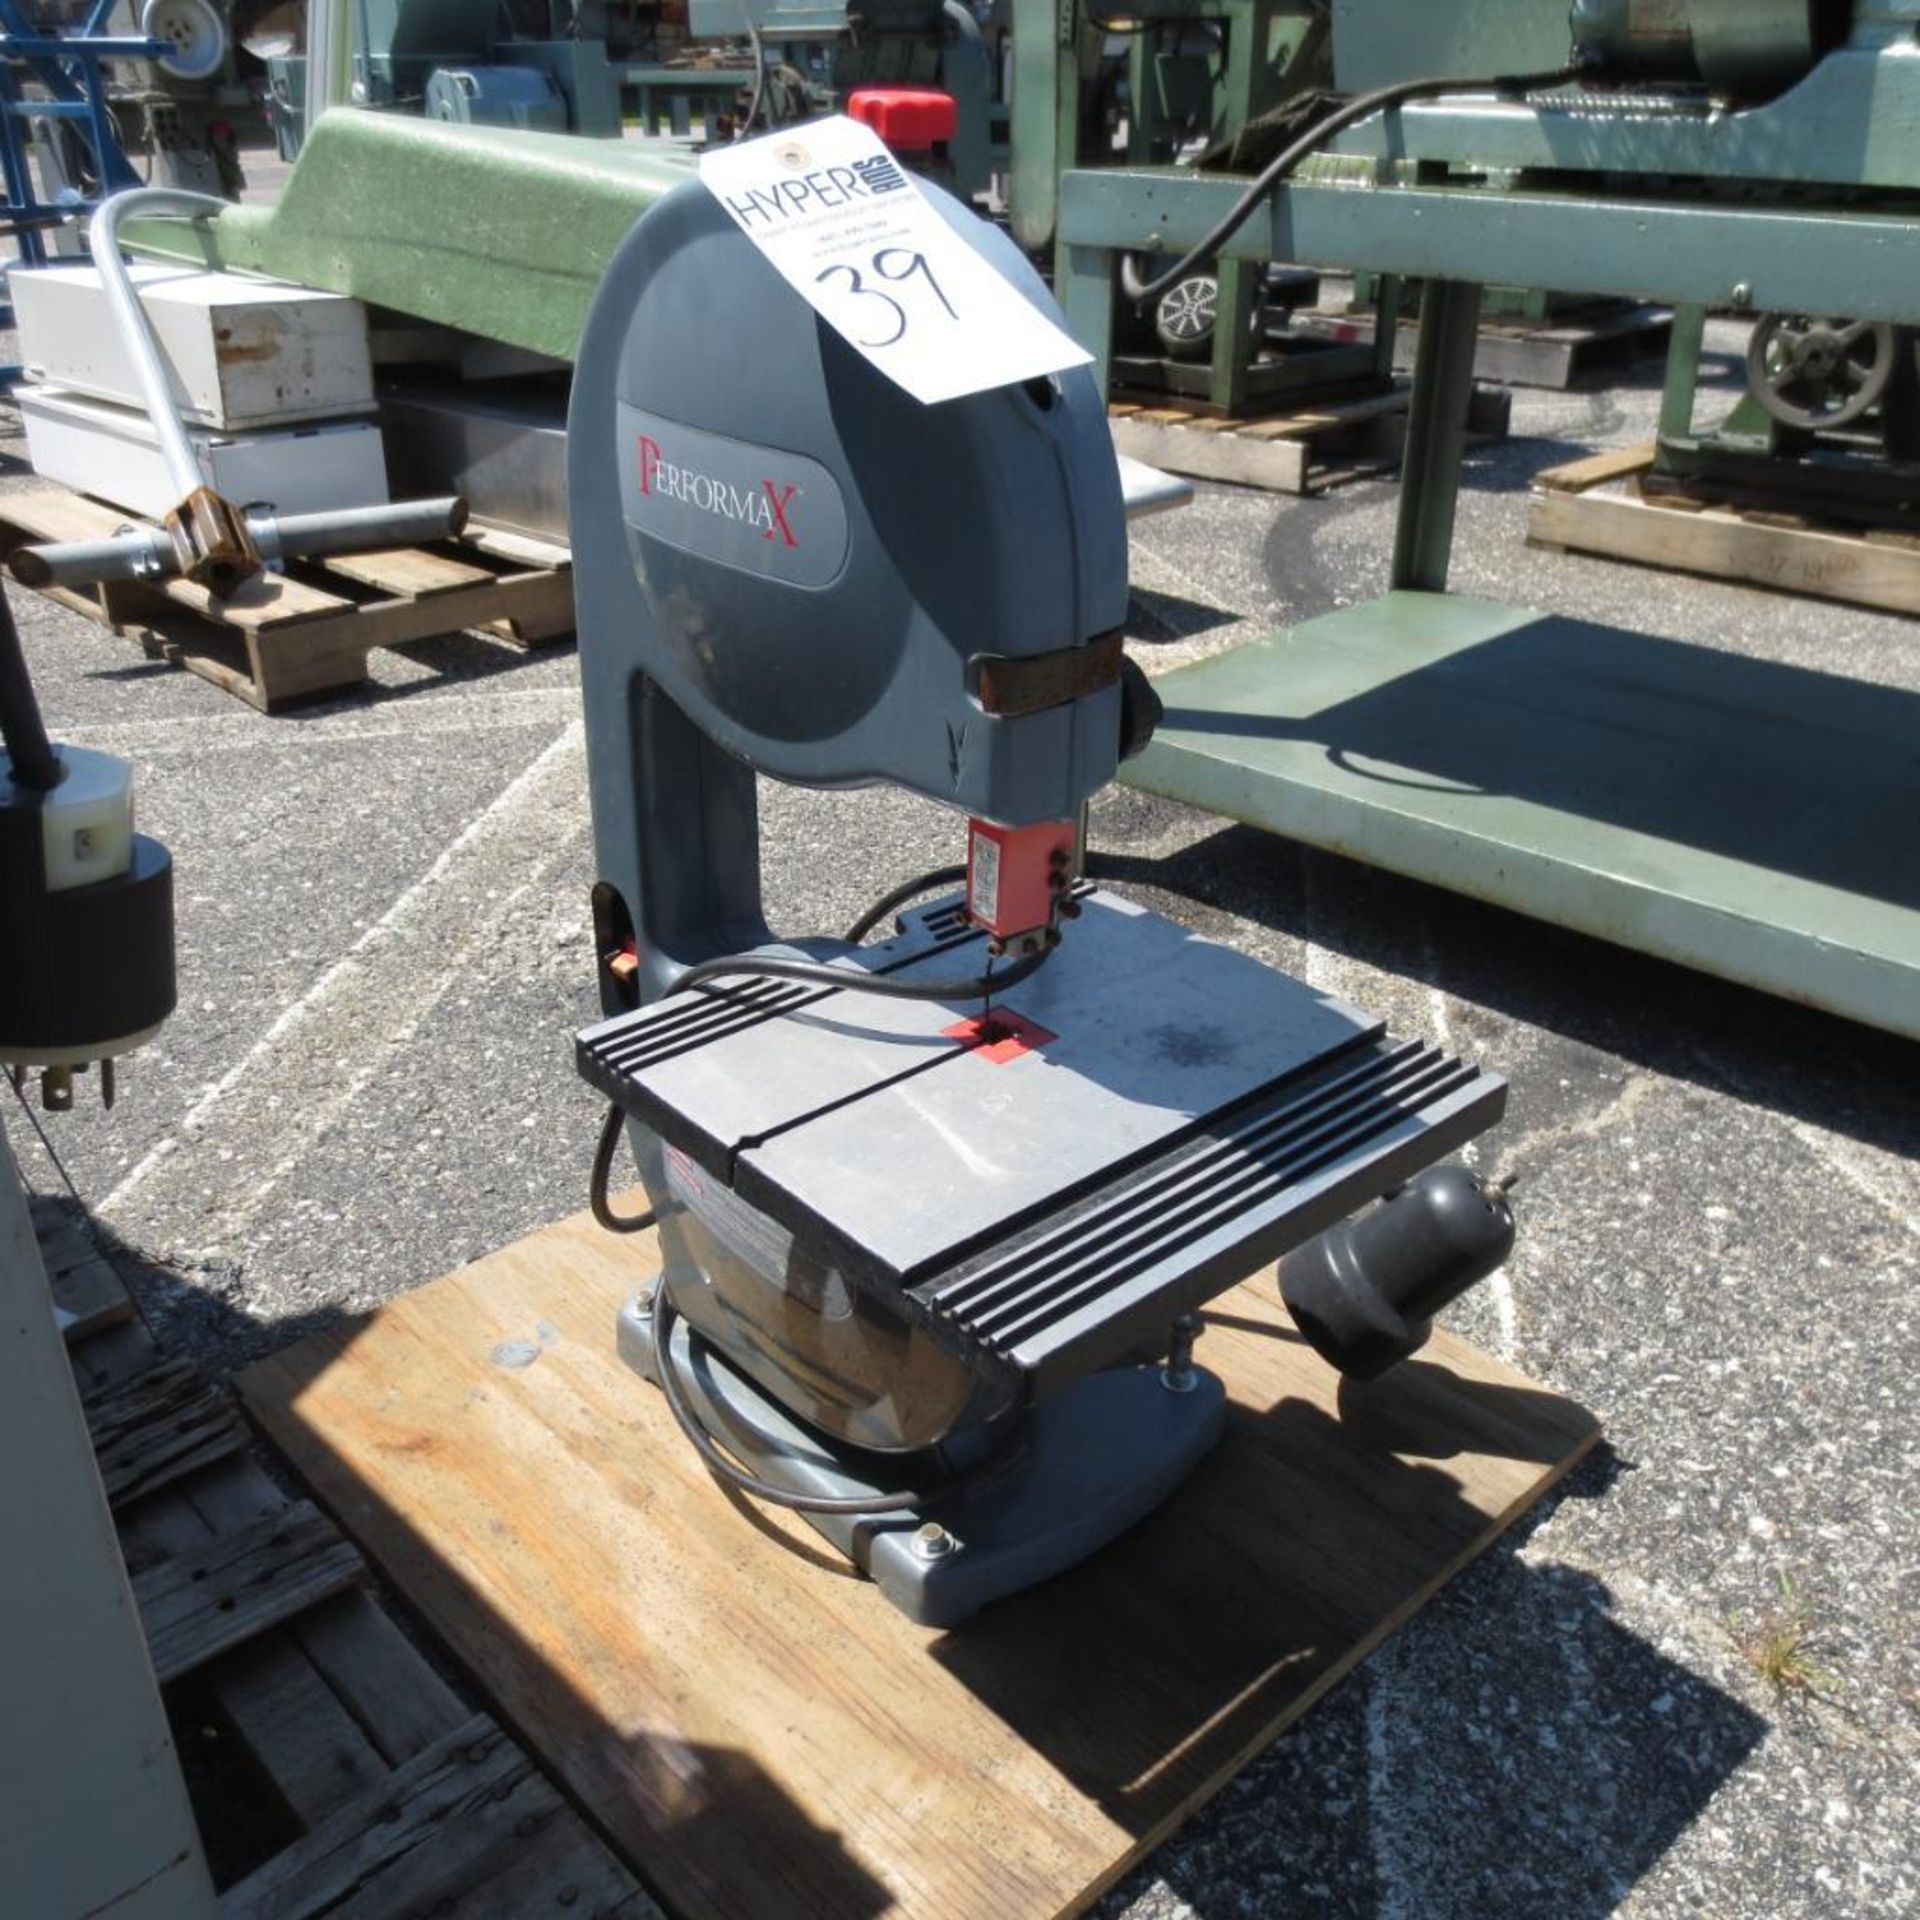 Performax 240-3730 Vertical Band Saw, 120V, 2.5 Amp, 3200 FPM, 1-1/8", 0-45" located at 707 Burlingt - Image 2 of 3